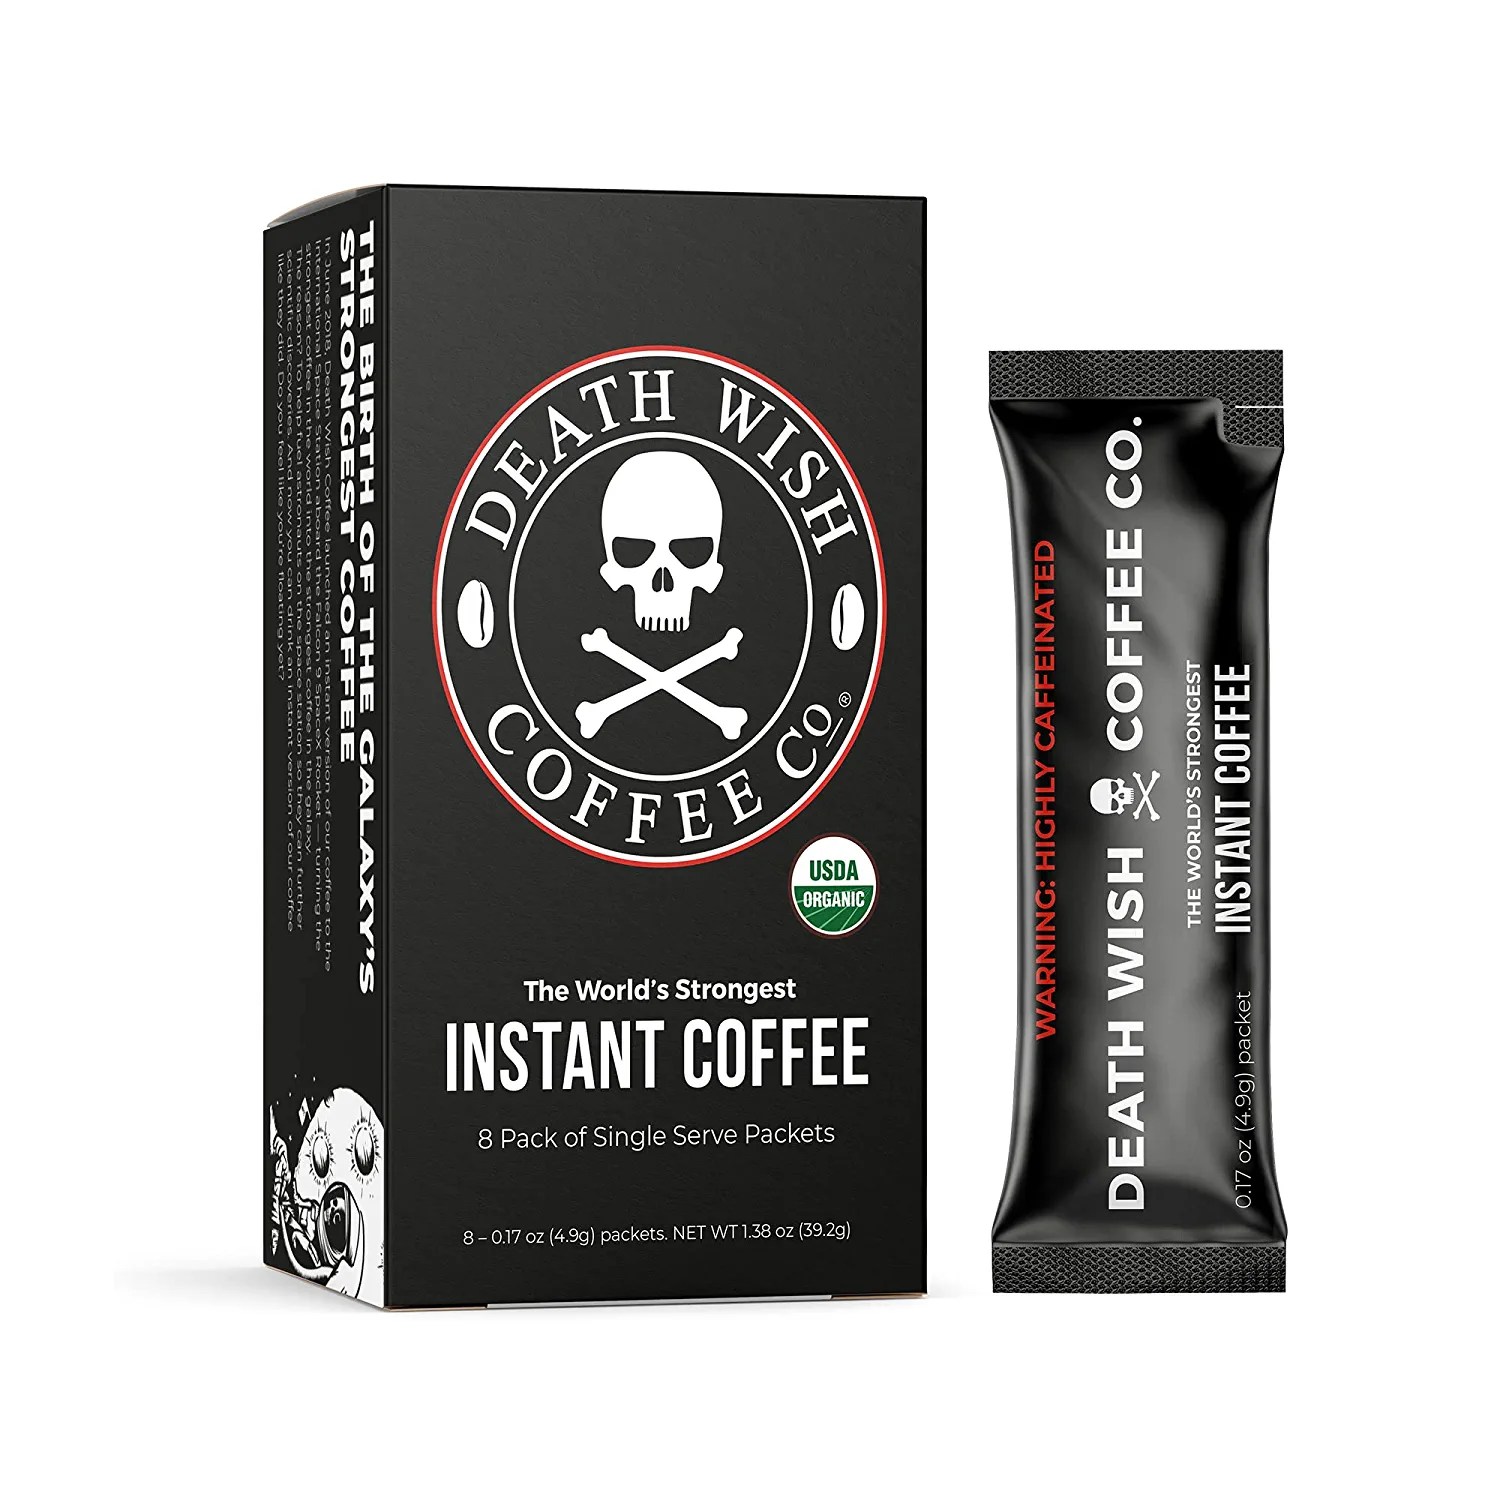 death wish instant coffee packet and the box, one of the best instant coffees